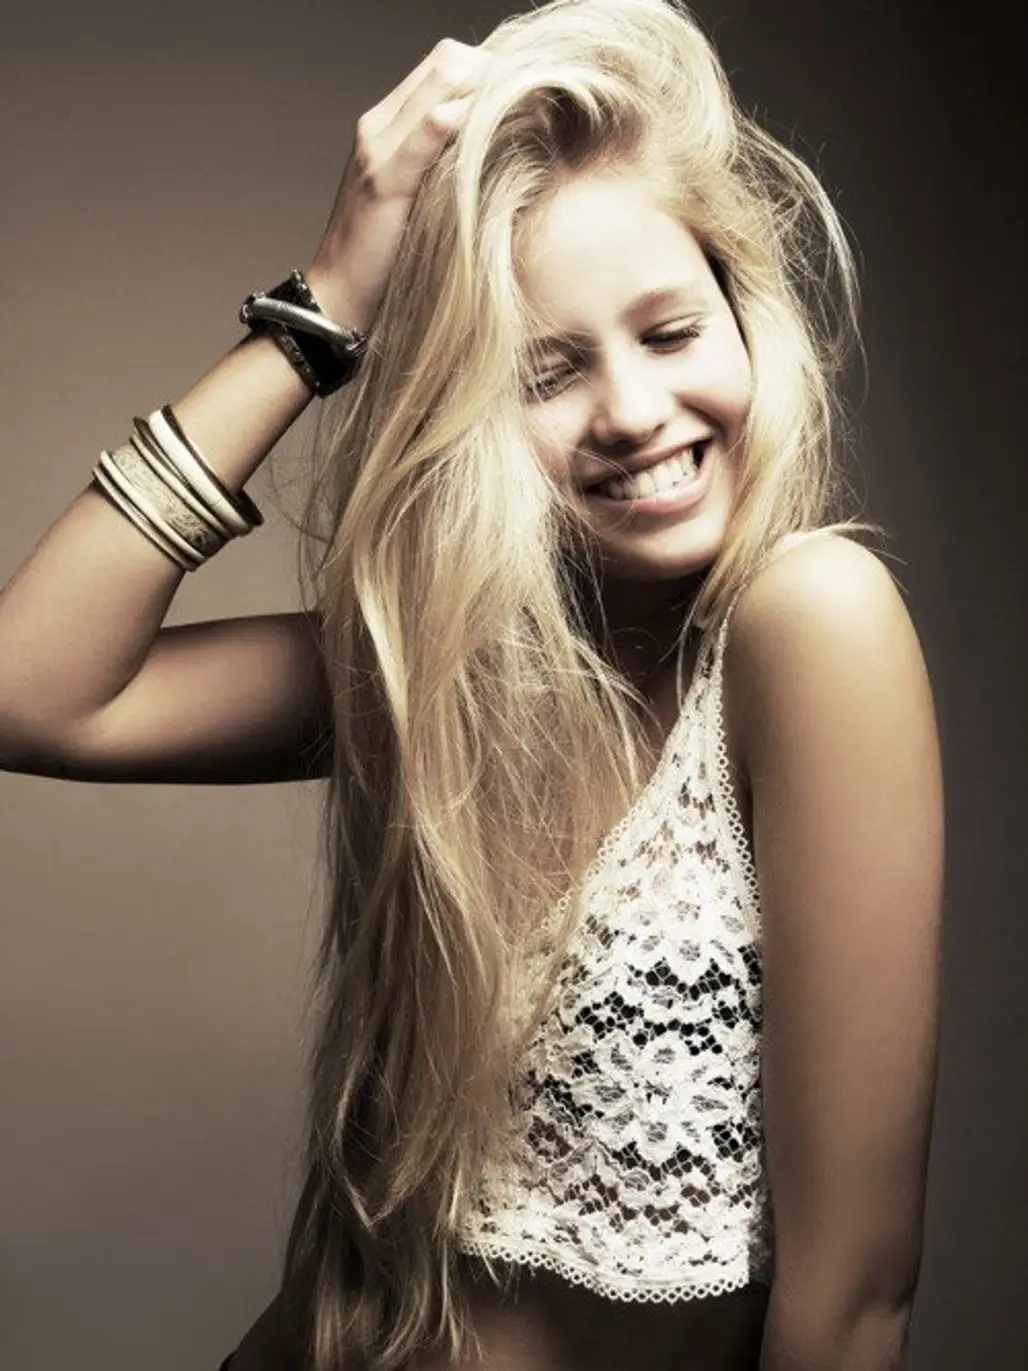 hair,blond,hairstyle,photography,beauty,